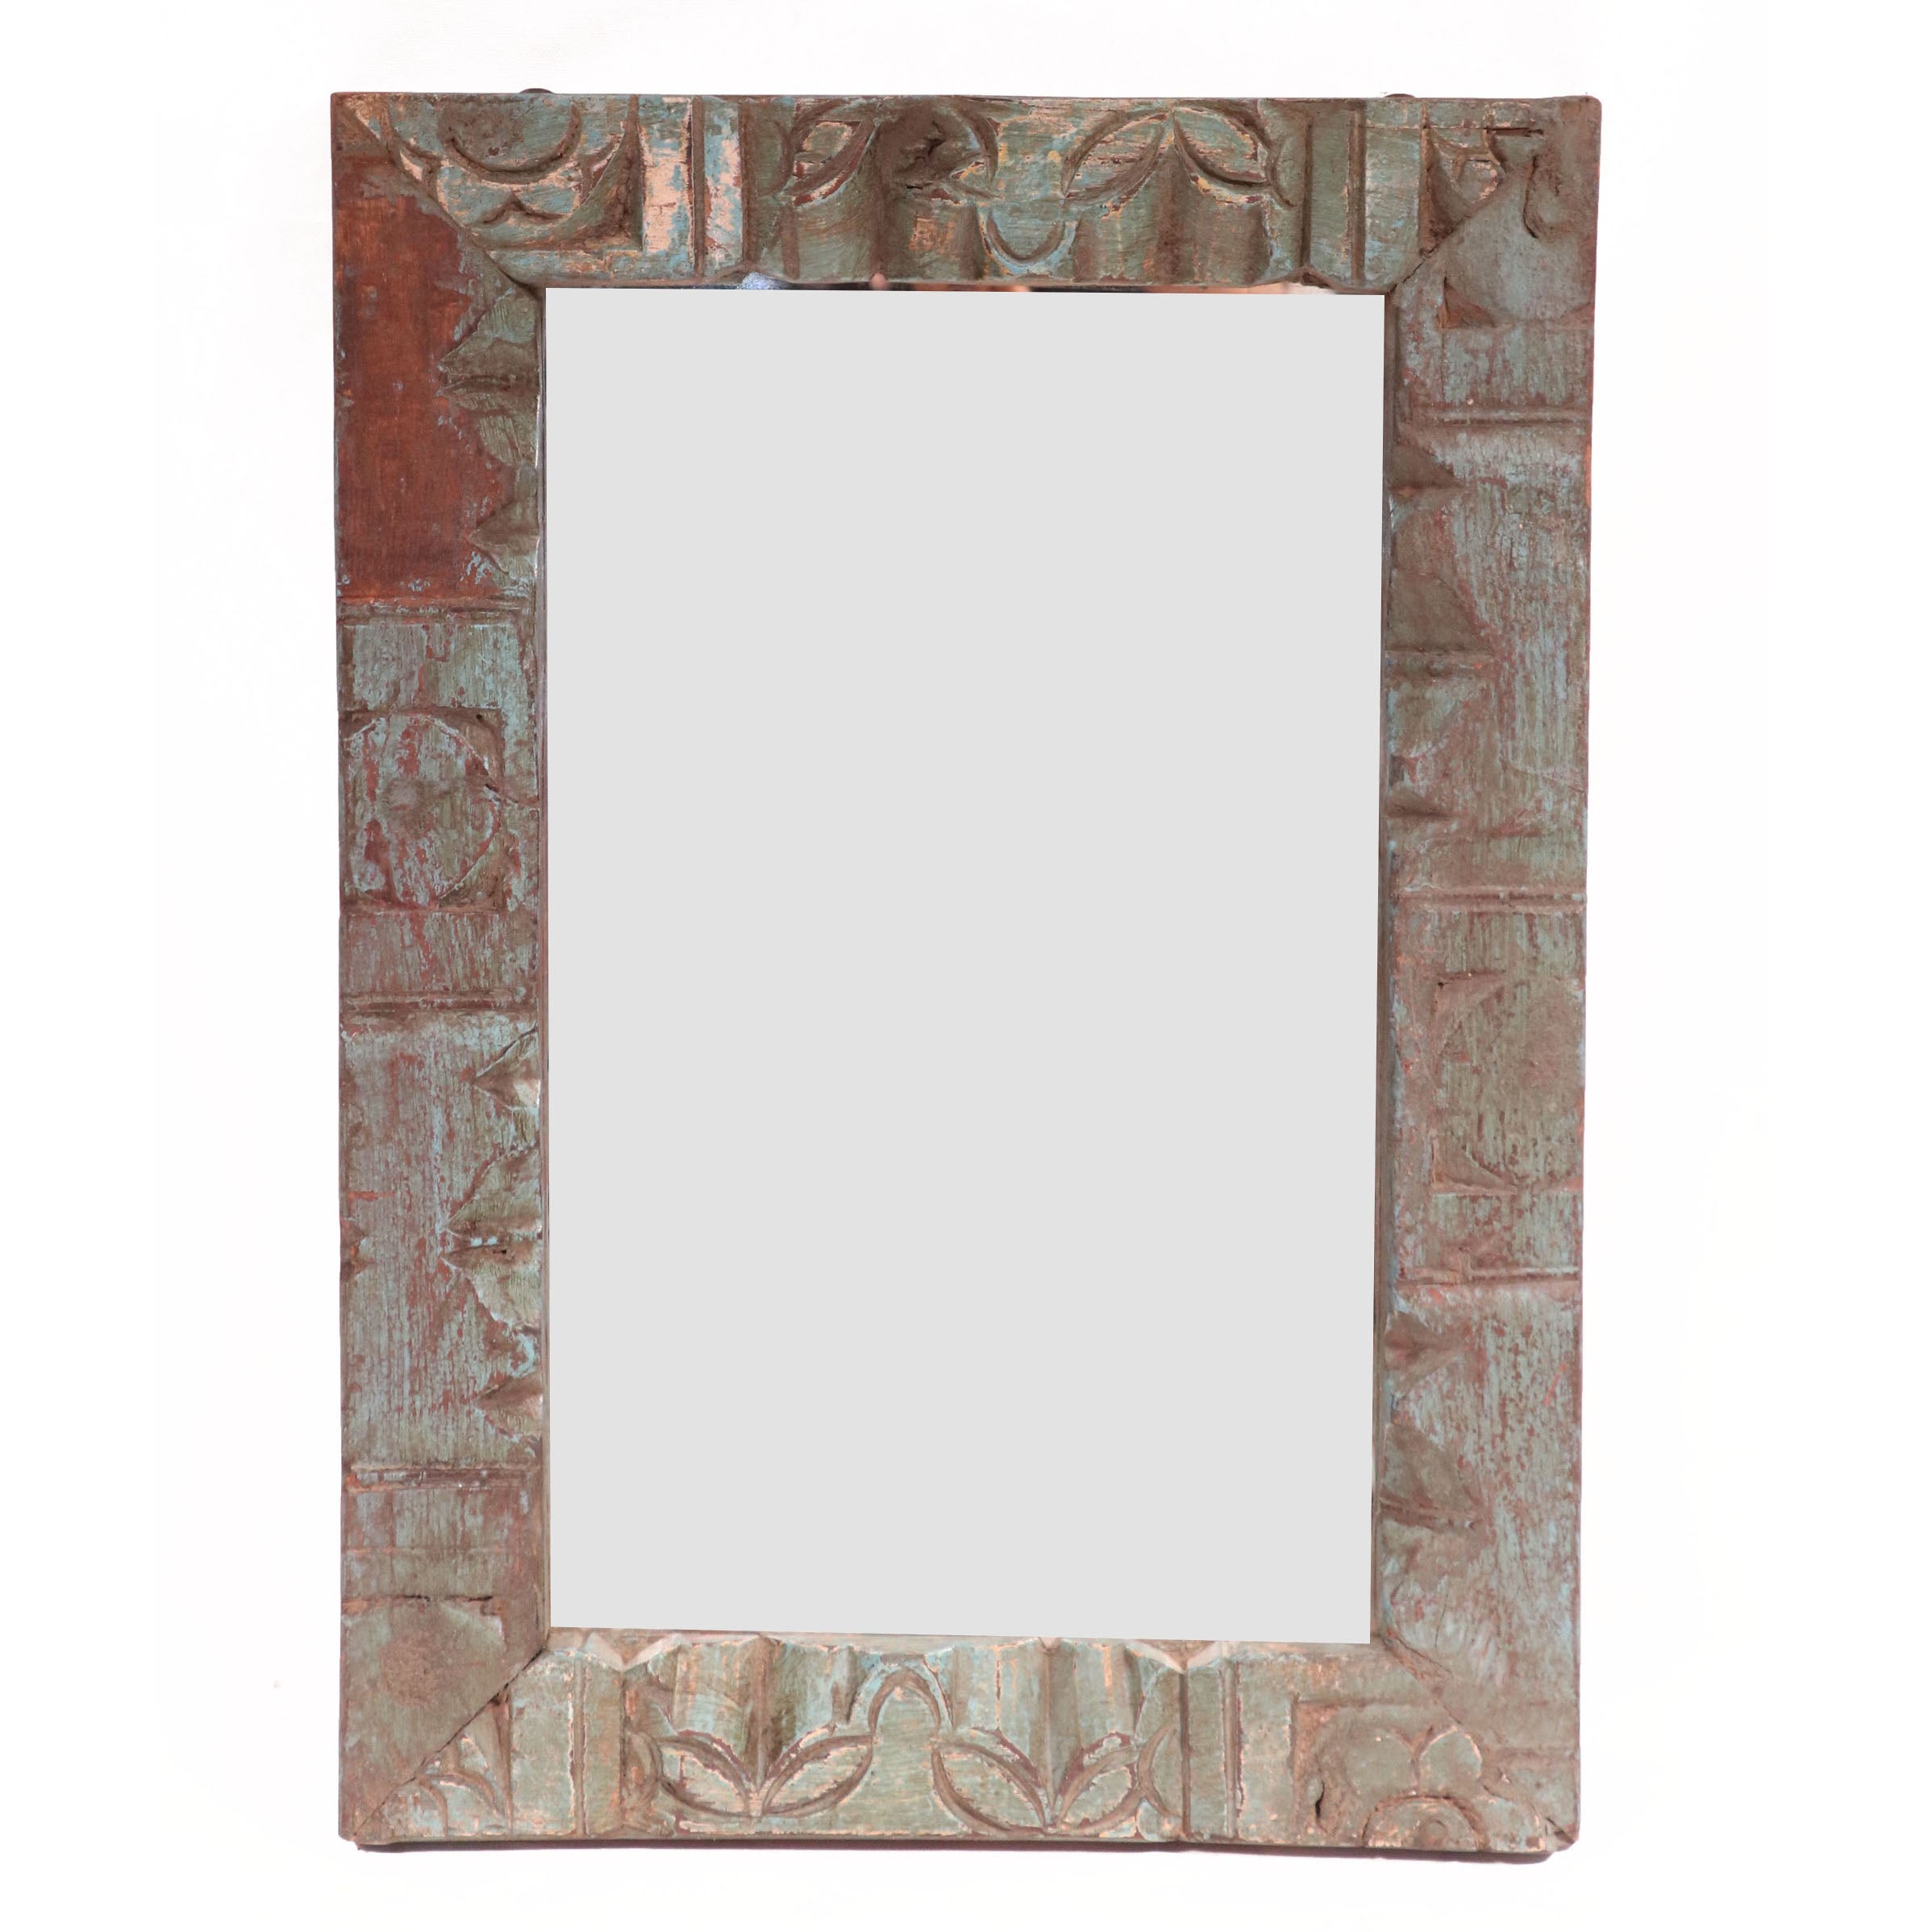 Thick carved wooden frame with mirror Mirror